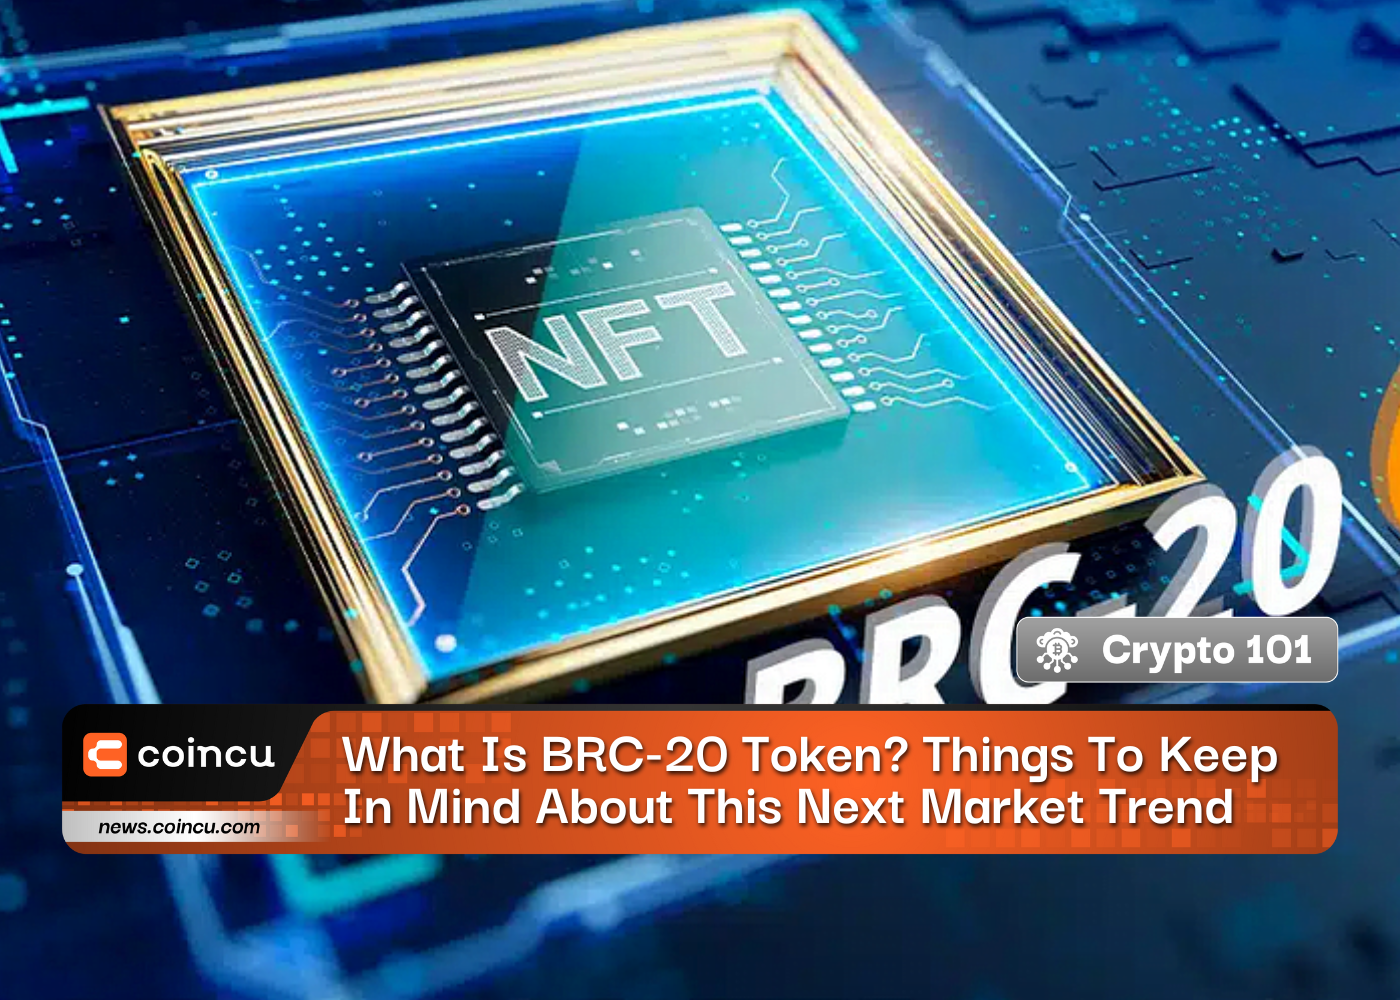 What Is BRC-20 Token? Things To Keep In Mind About This Next Market Trend